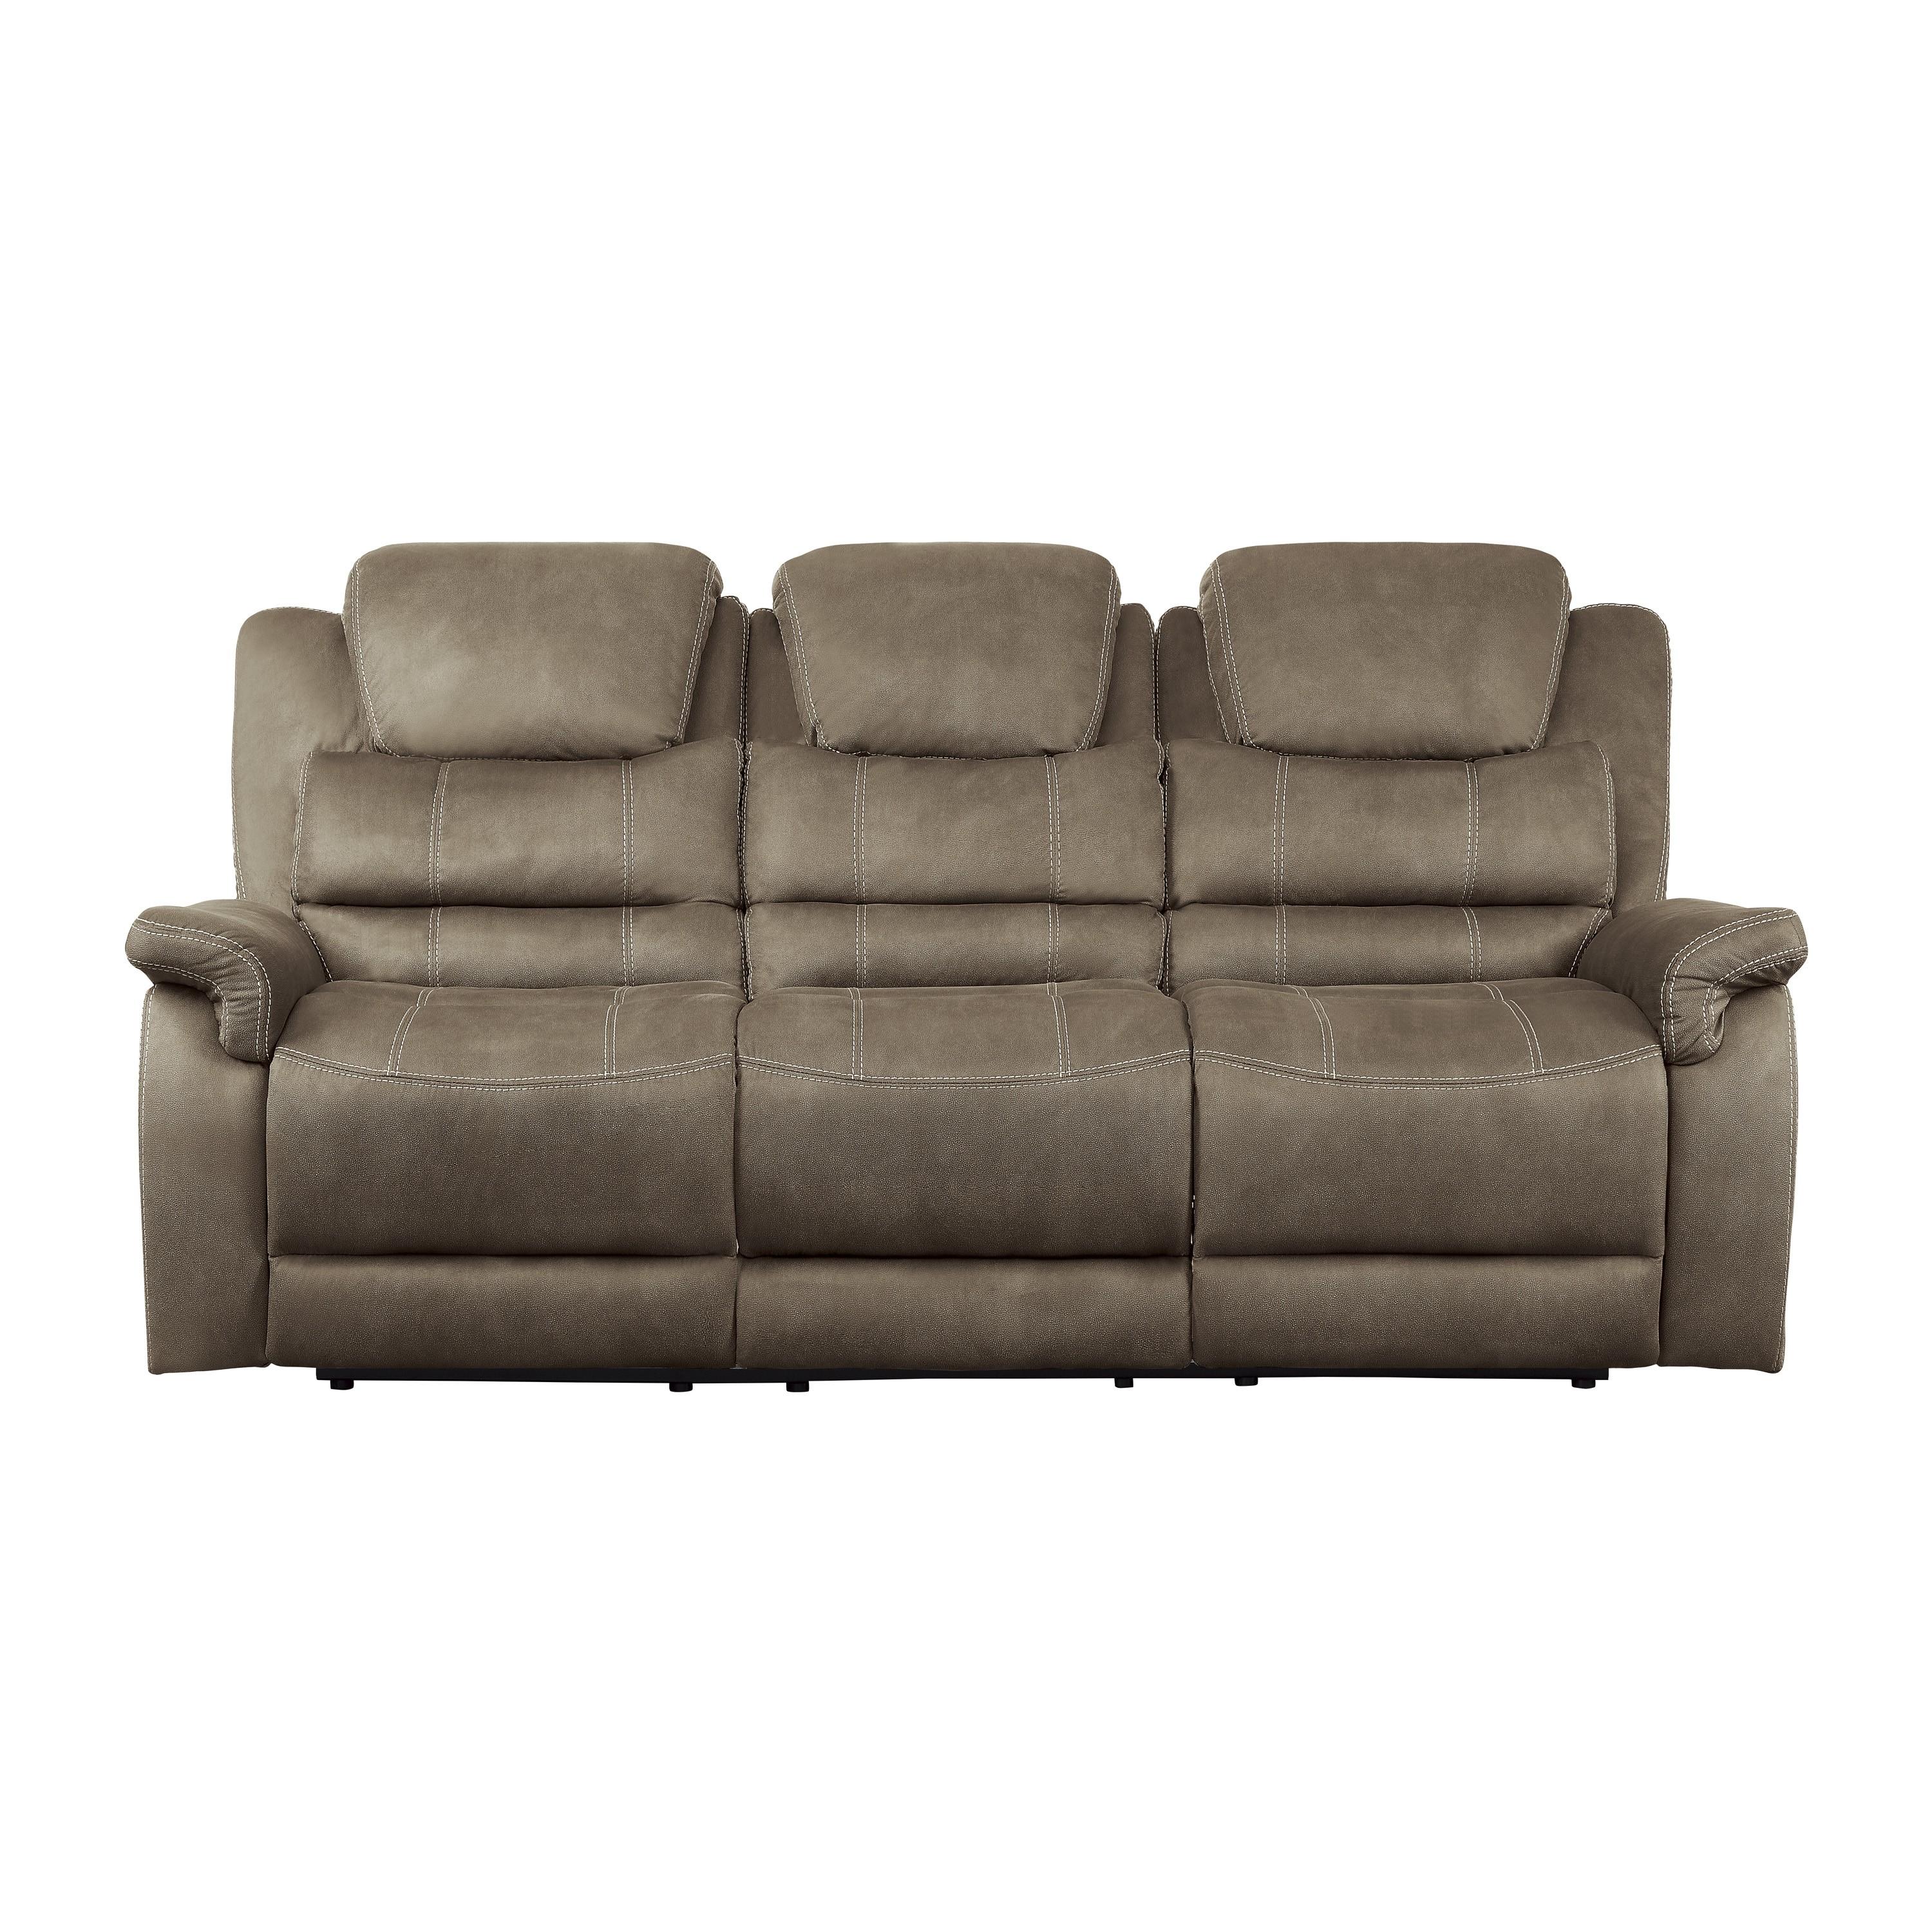 Transitional Reclining Sofa 9848BR-3 Shola 9848BR-3 in Brown Microfiber